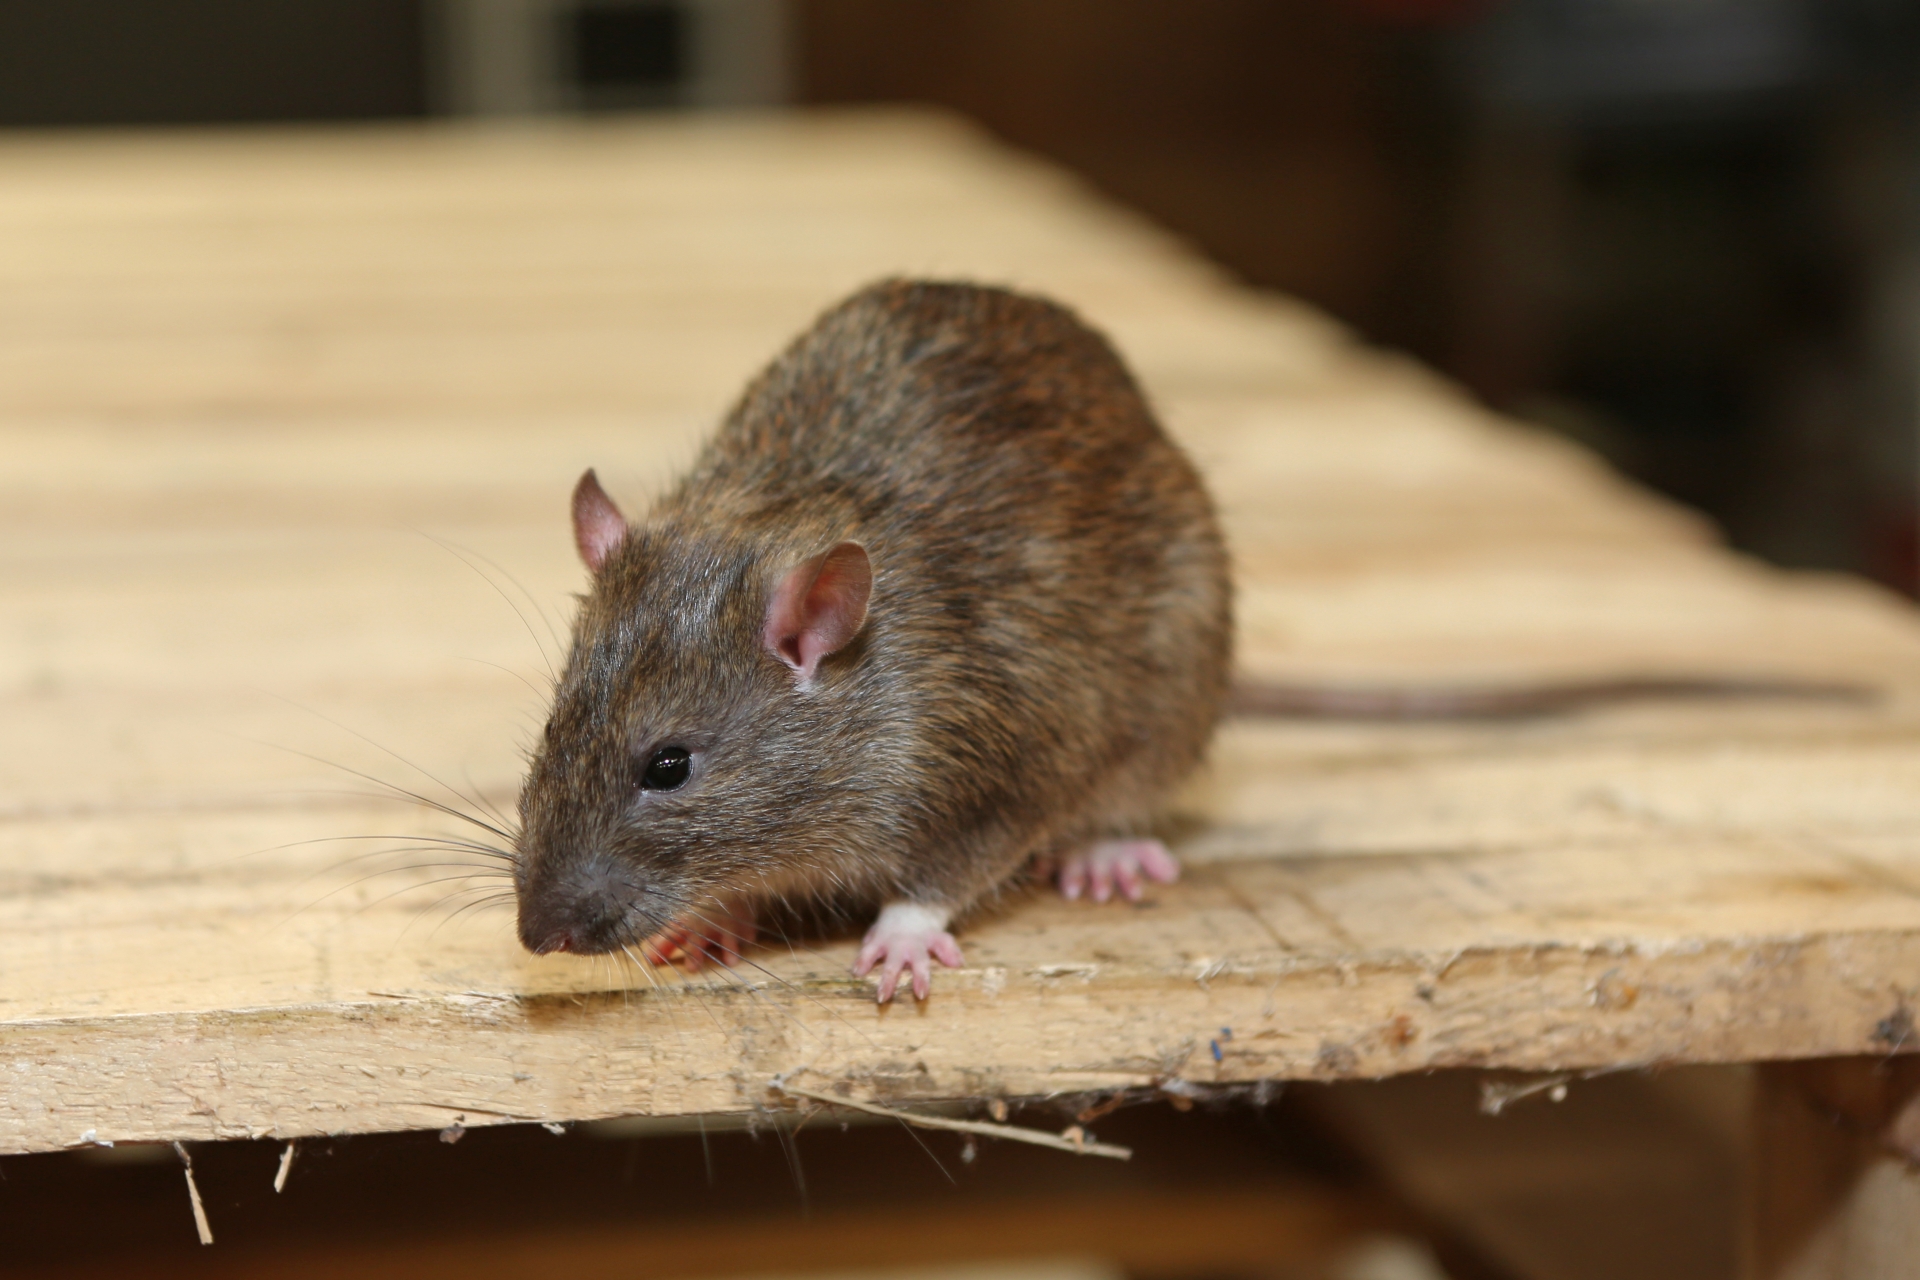 Rat extermination, Pest Control in Orsett, Chafford Hundred, RM16. Call Now 020 8166 9746